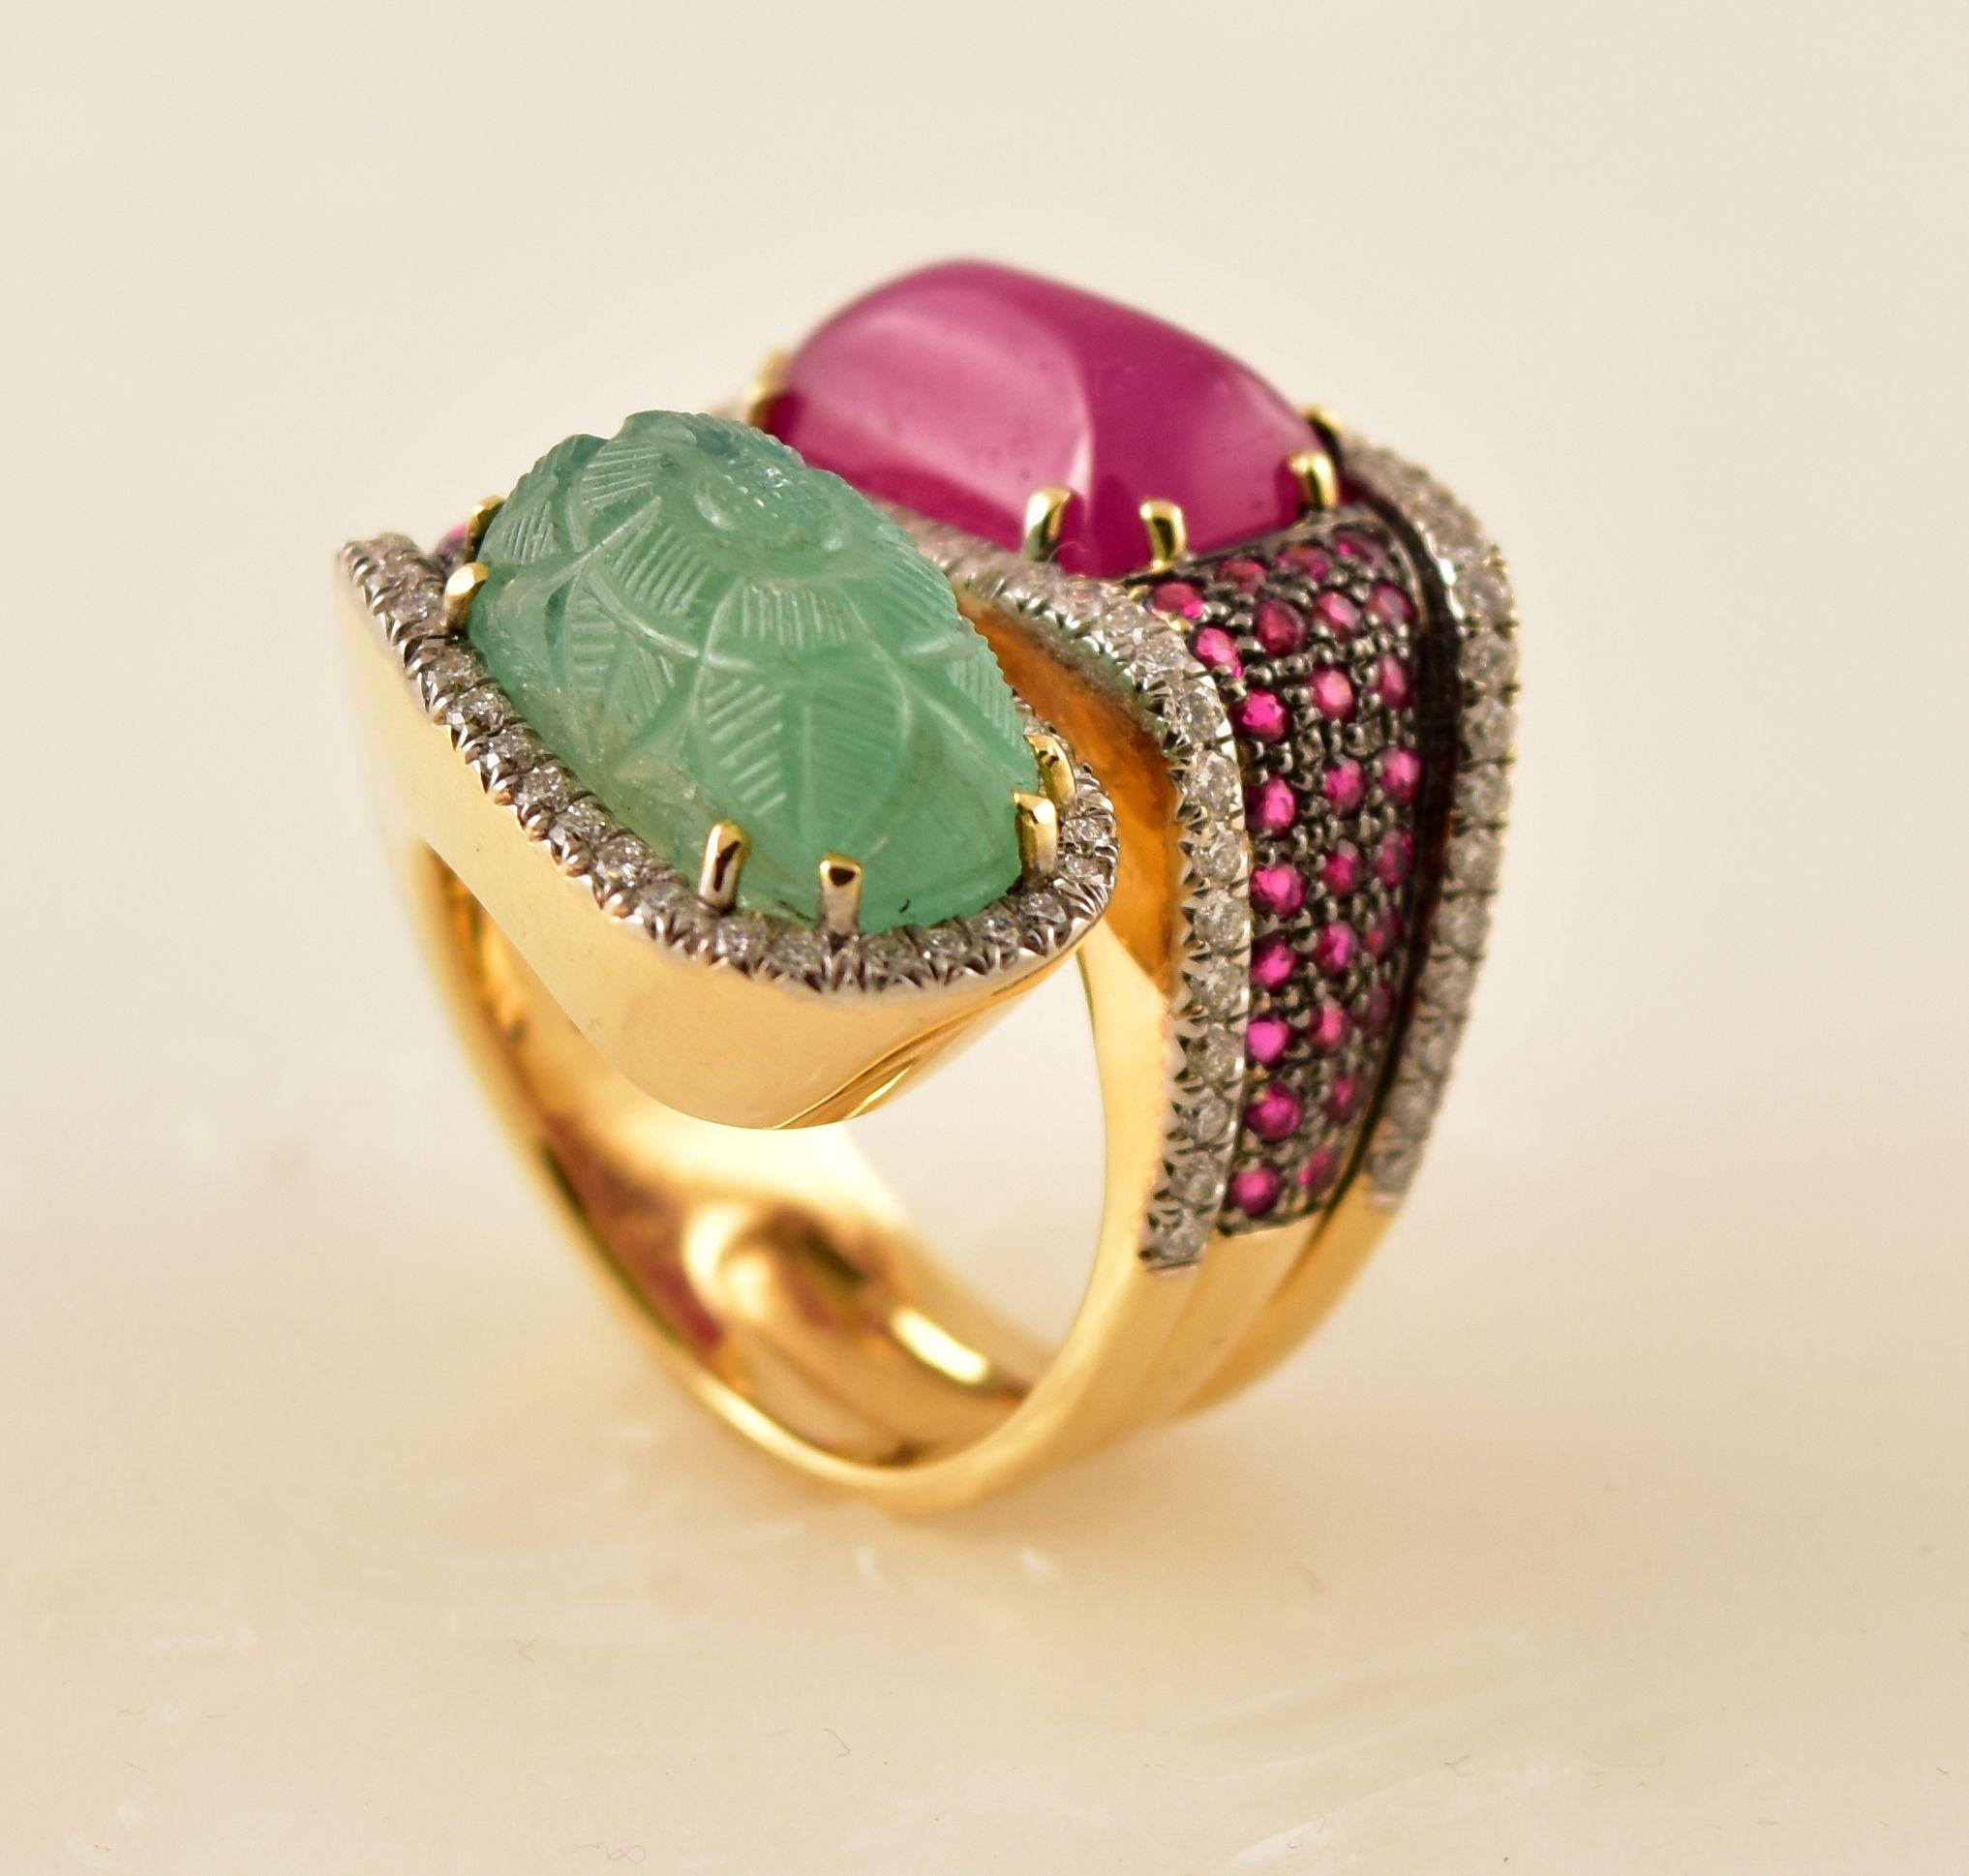 Stunning Carved Green Emerald, Ruby and Diamond Statement Ring, hand crafted in 18k yellow Gold by Tony Duquette, Designer Extraordinaire! green Emerald (app. 10 carat); Ruby (app. 20 carat) and Diamonds (app. 1.23 carat); Ring size 6 1/2; measuring